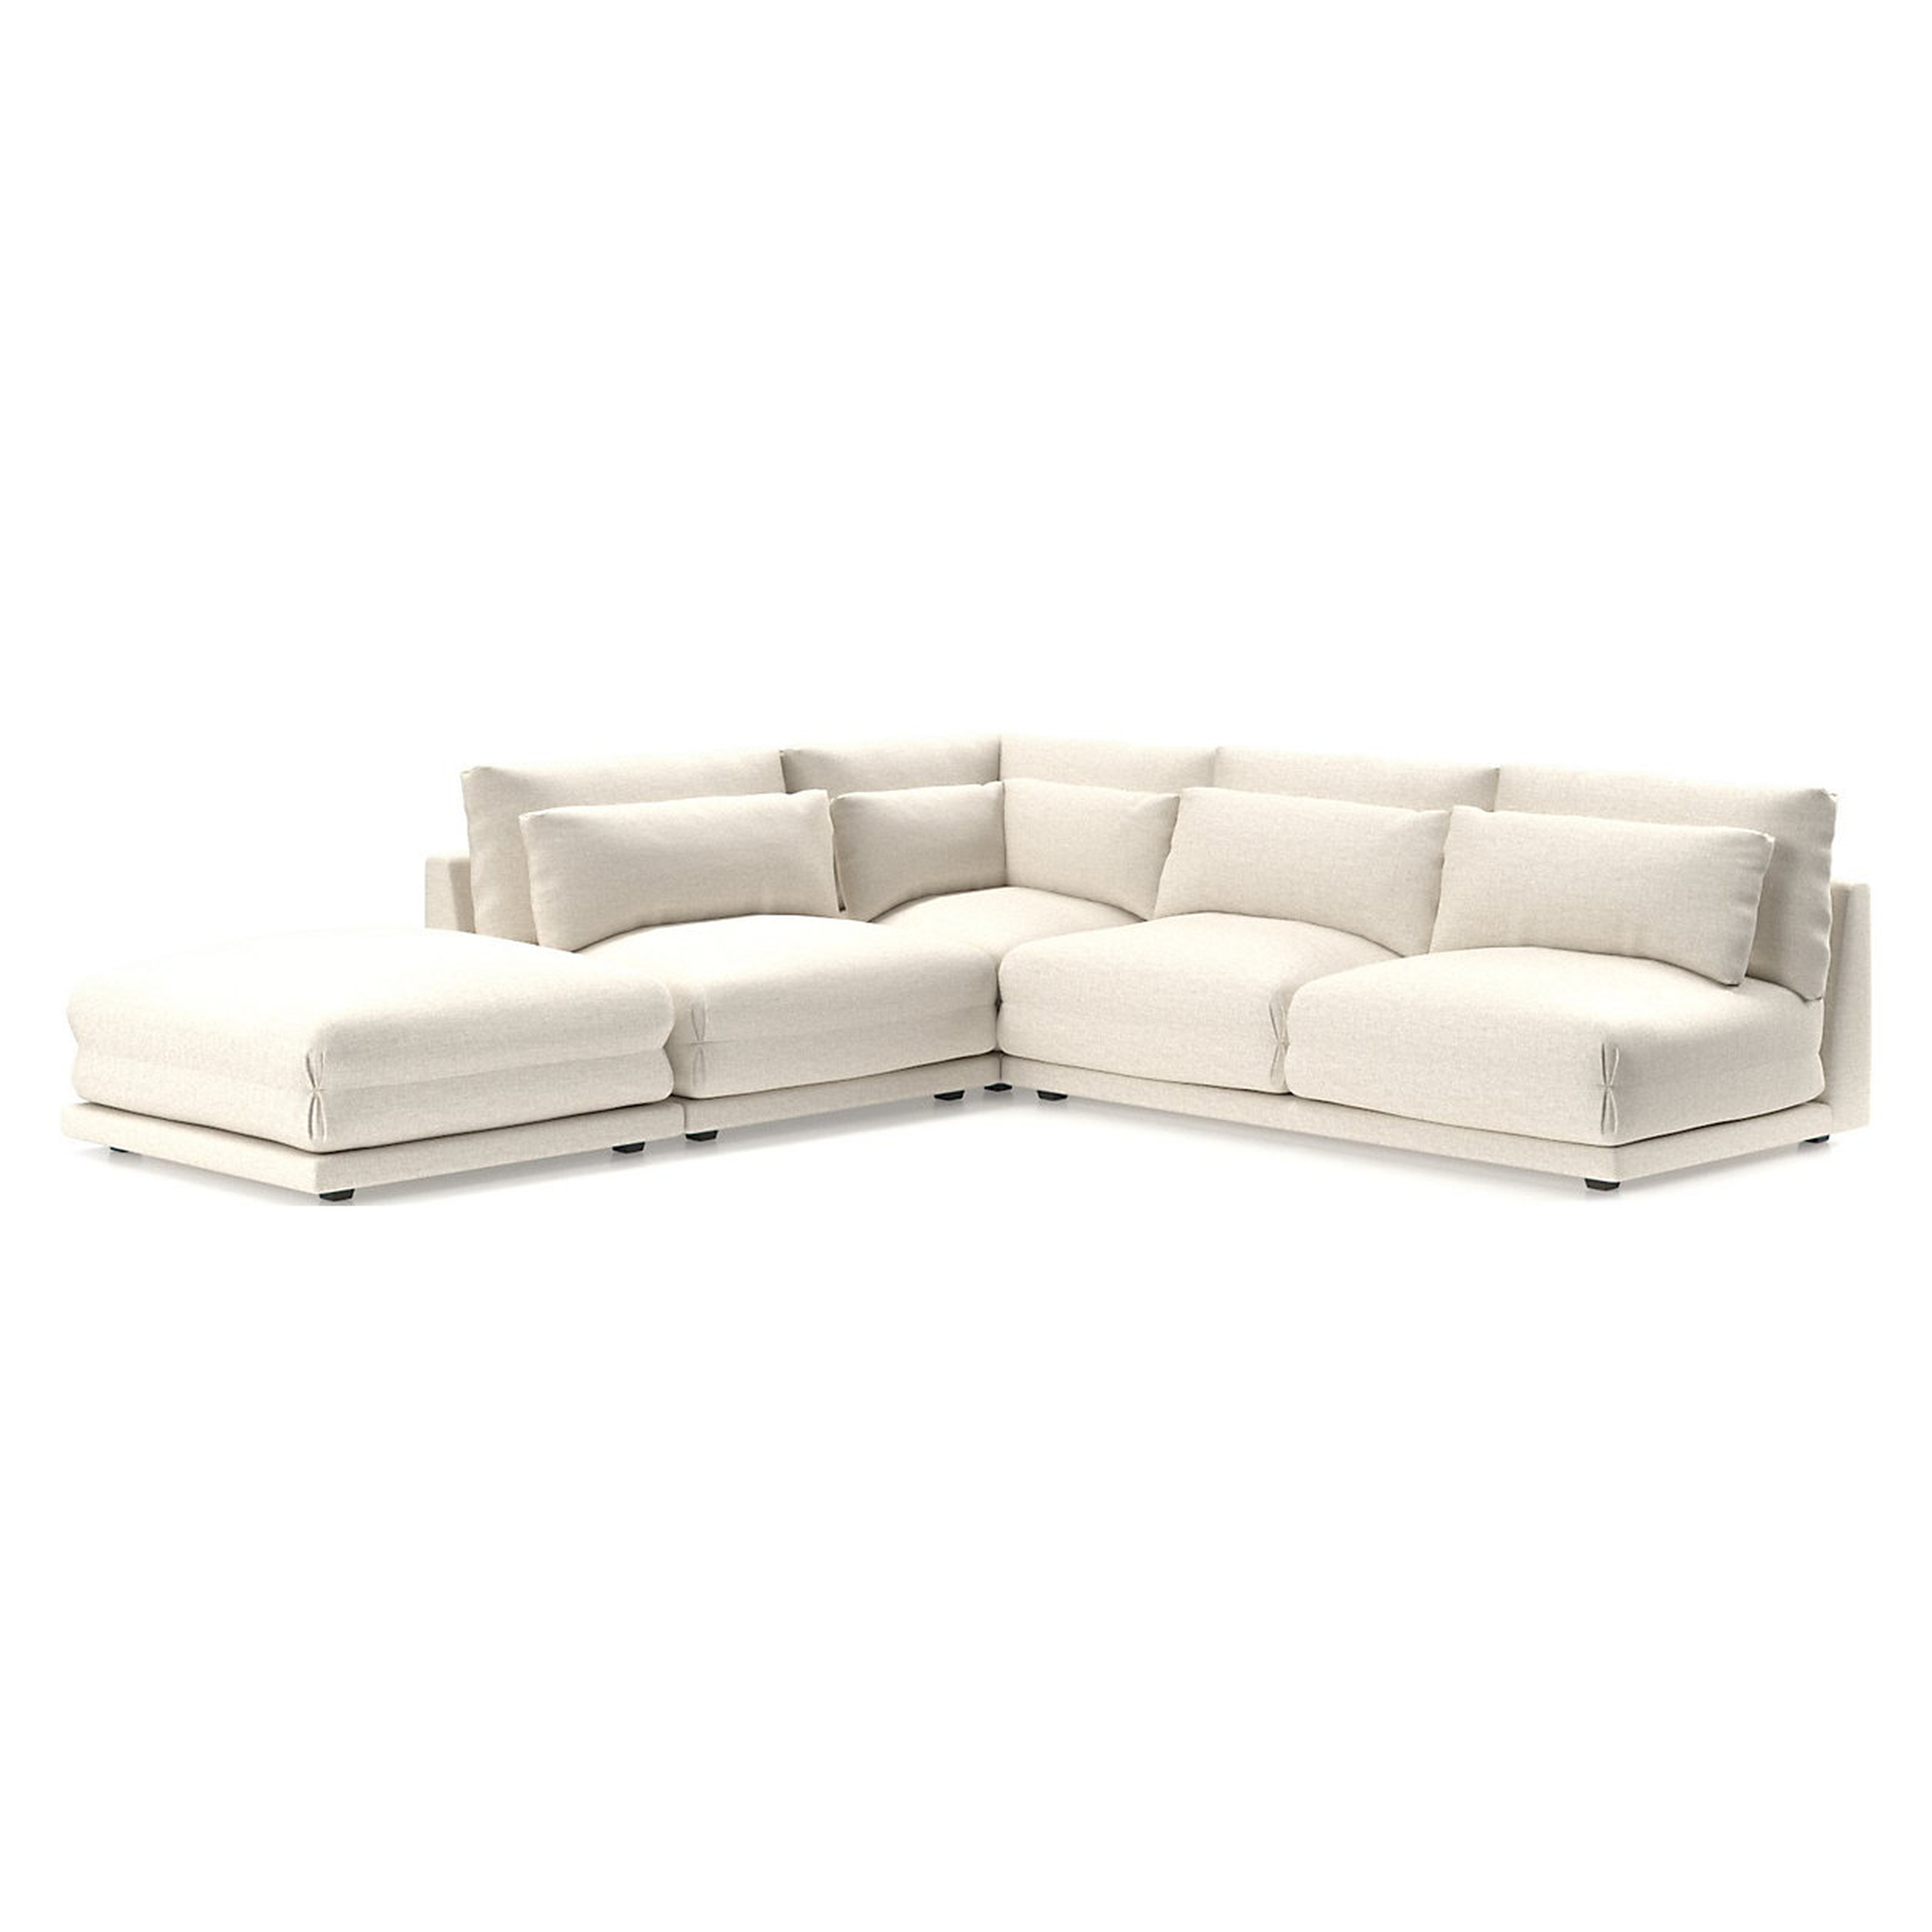 Plush 4-Piece Sectional - Ascend Desert - Crate and Barrel